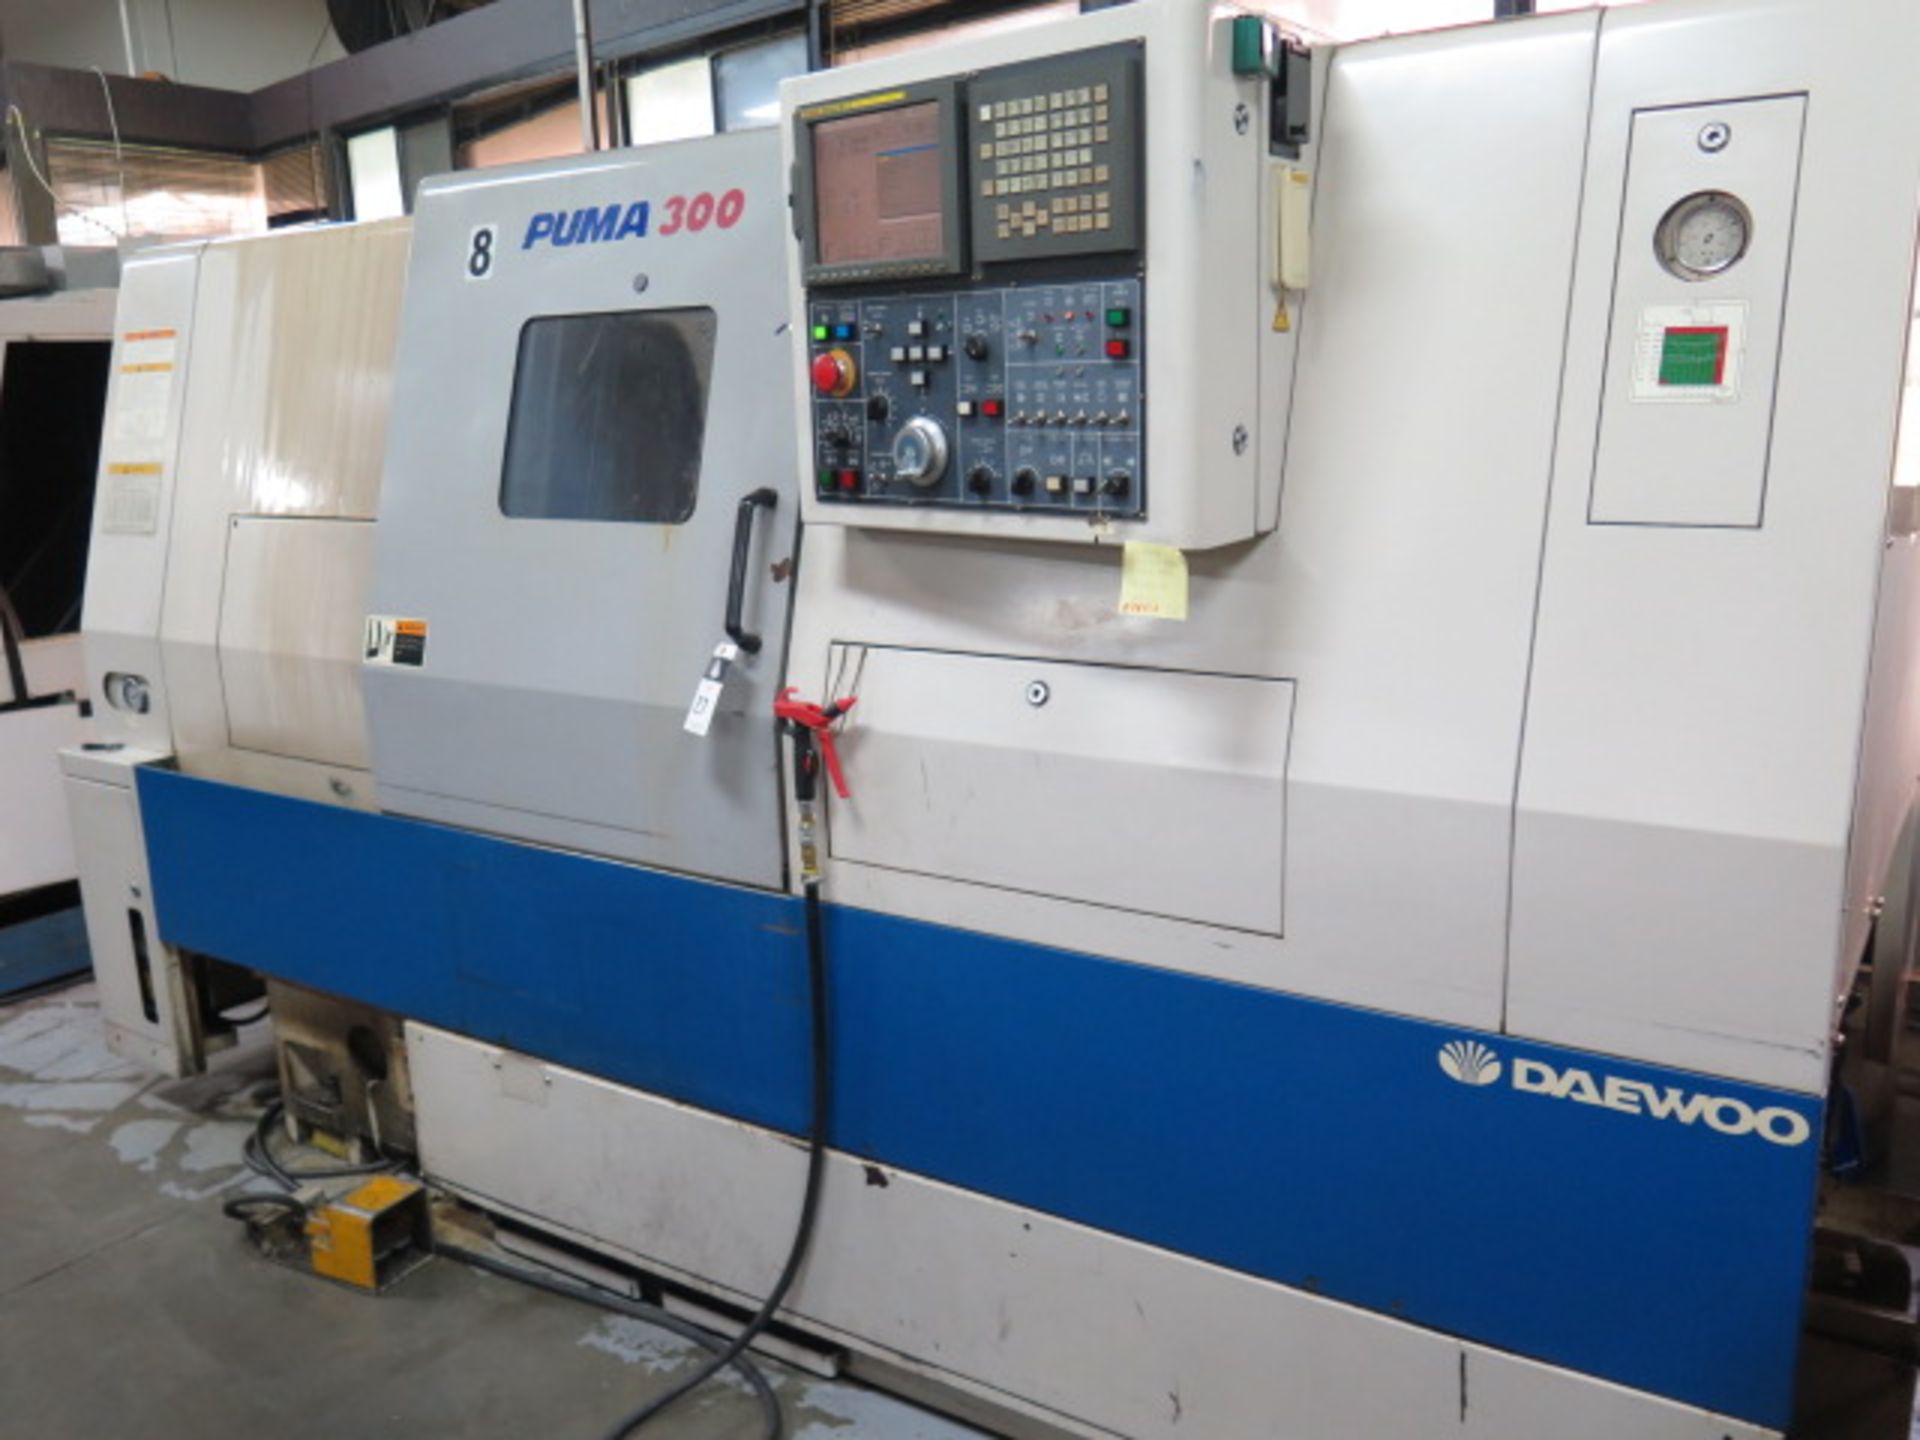 2000 Daewoo PUMA 300B CNC Turning Center s/n PN250827 w/ Fanuc Series 18i-T Controls, SOLD AS IS - Image 4 of 15